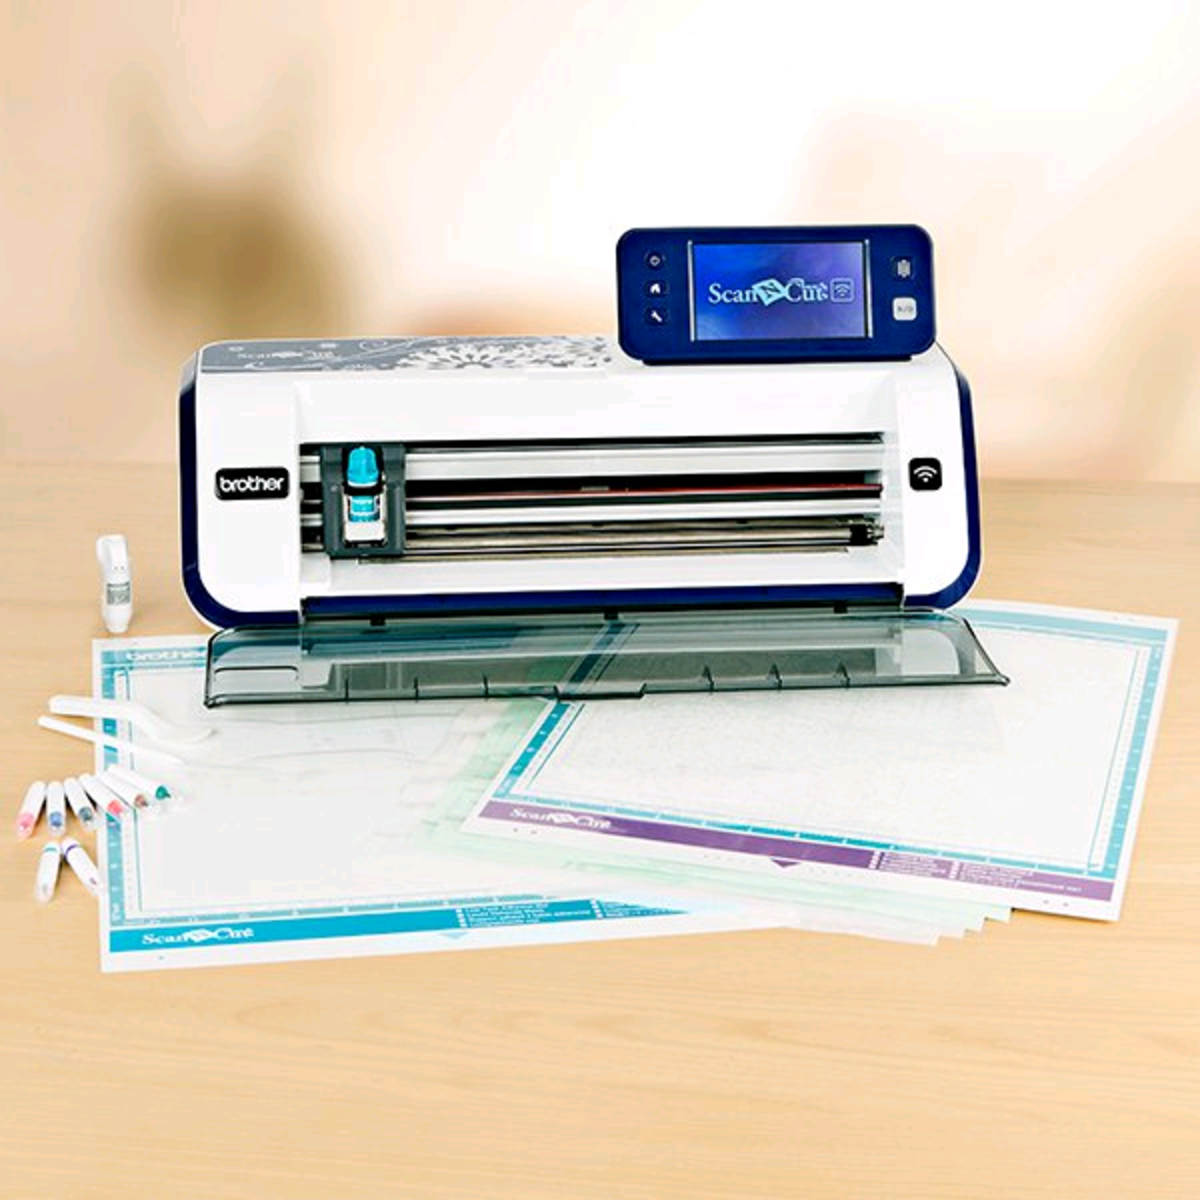 The Brother ScanNCut line of cutting machines is great for home use.